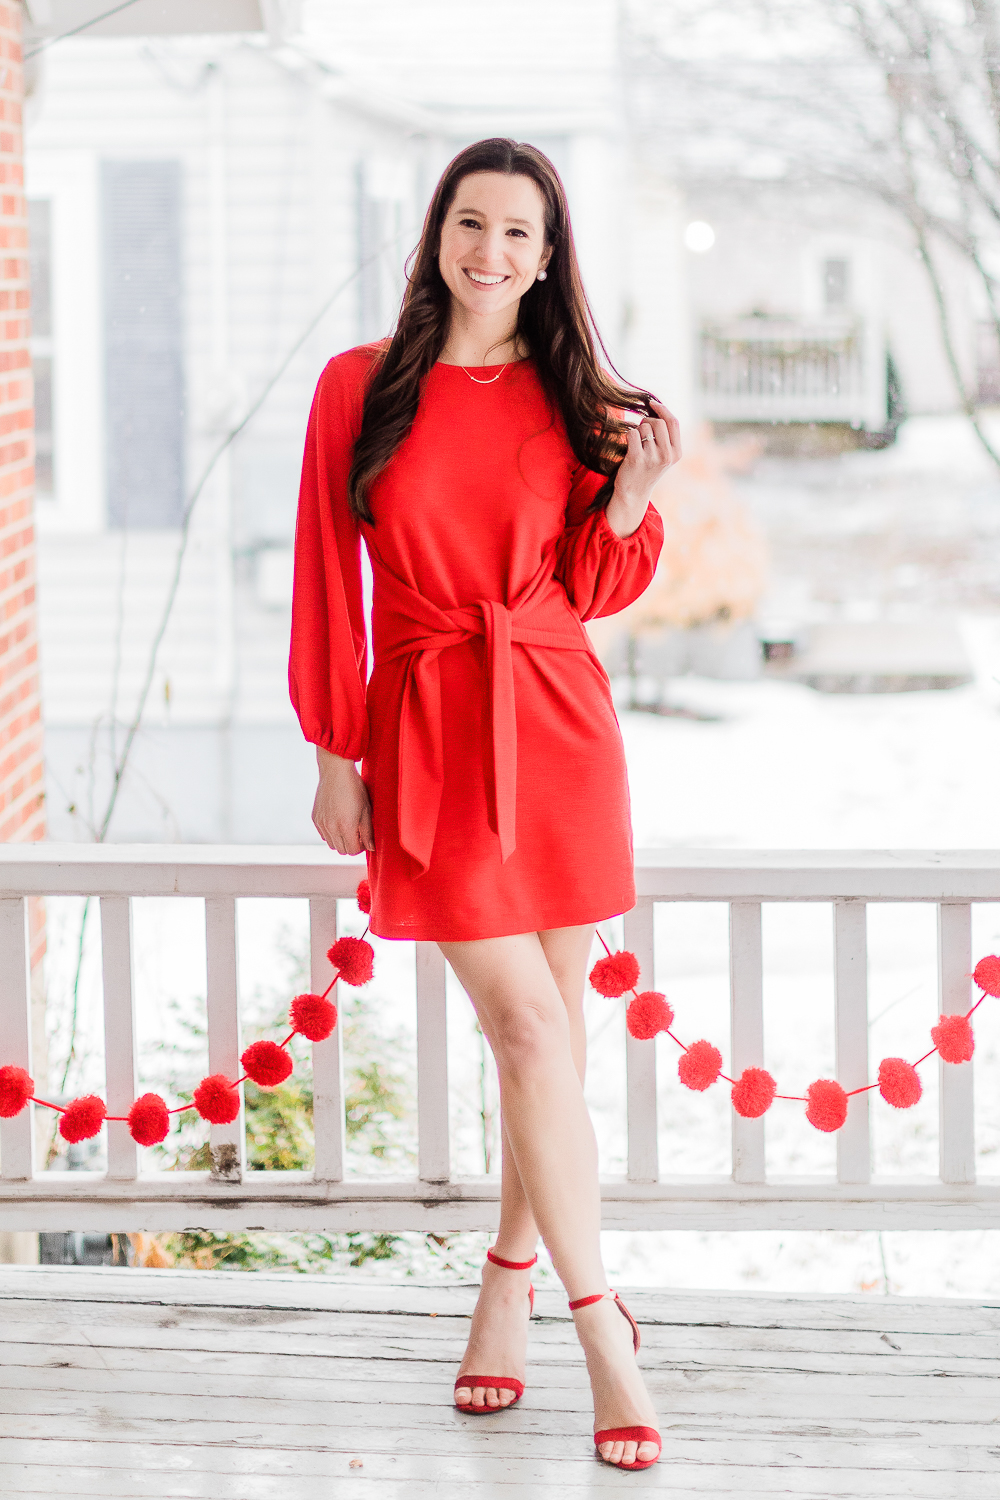 Amazon tie waist sweater pencil dress, Amazon red block heel sandals, Tiffany smile pendant necklace, Date Night Outfit Ideas for Valentine's Day, Valentines Day outfit ideas, Galentines Day outfit ideas, Valentines Day outfits, popular affordable fashion blogger, Stephanie Ziajka, popular affordable fashion blog, Diary of a Debutante